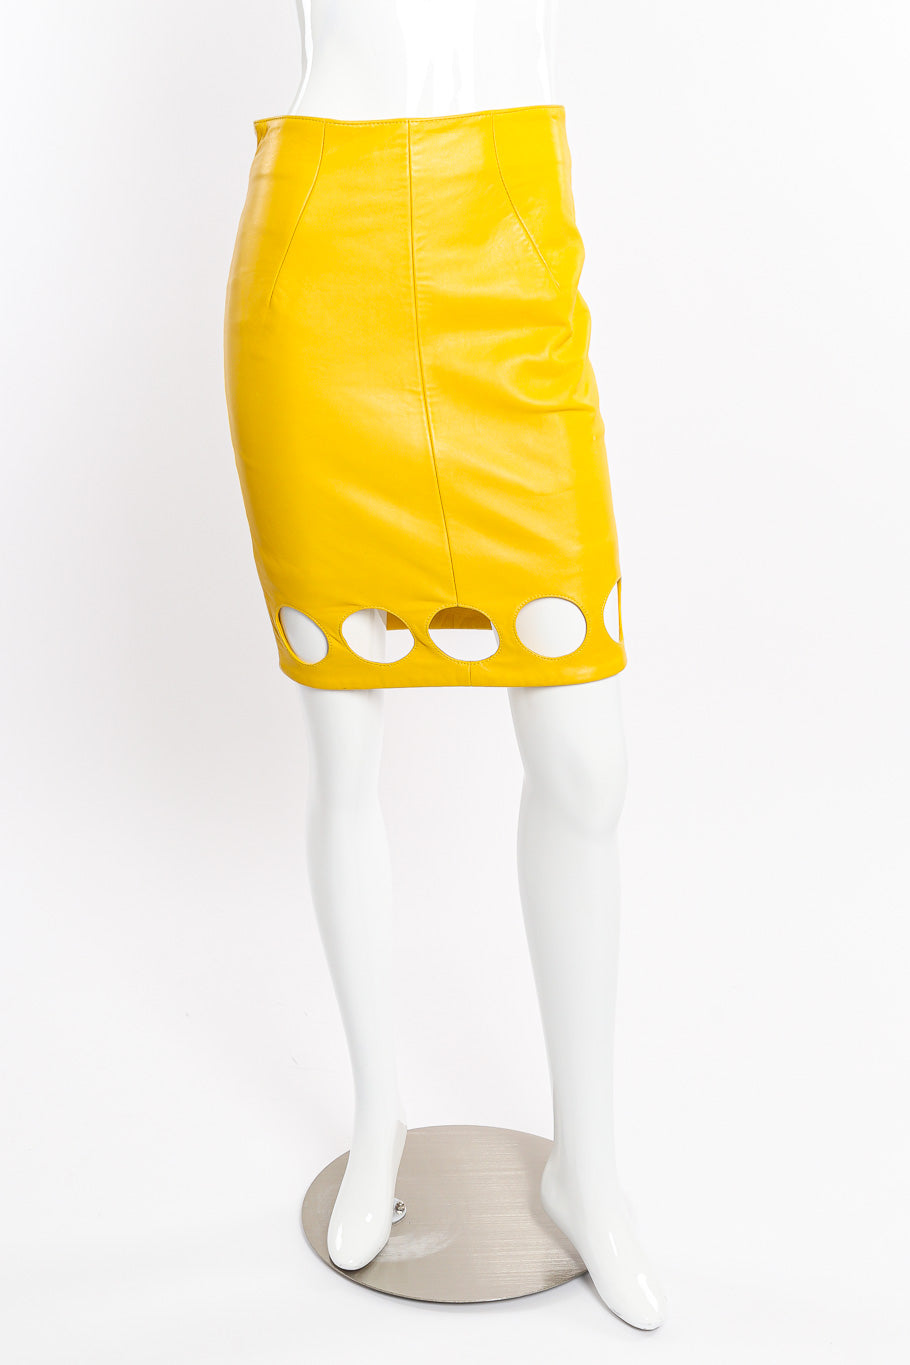 Vintage North Beach Cutout Leather Jacket and Skirt Set front view of skirt on mannequin @Recessla